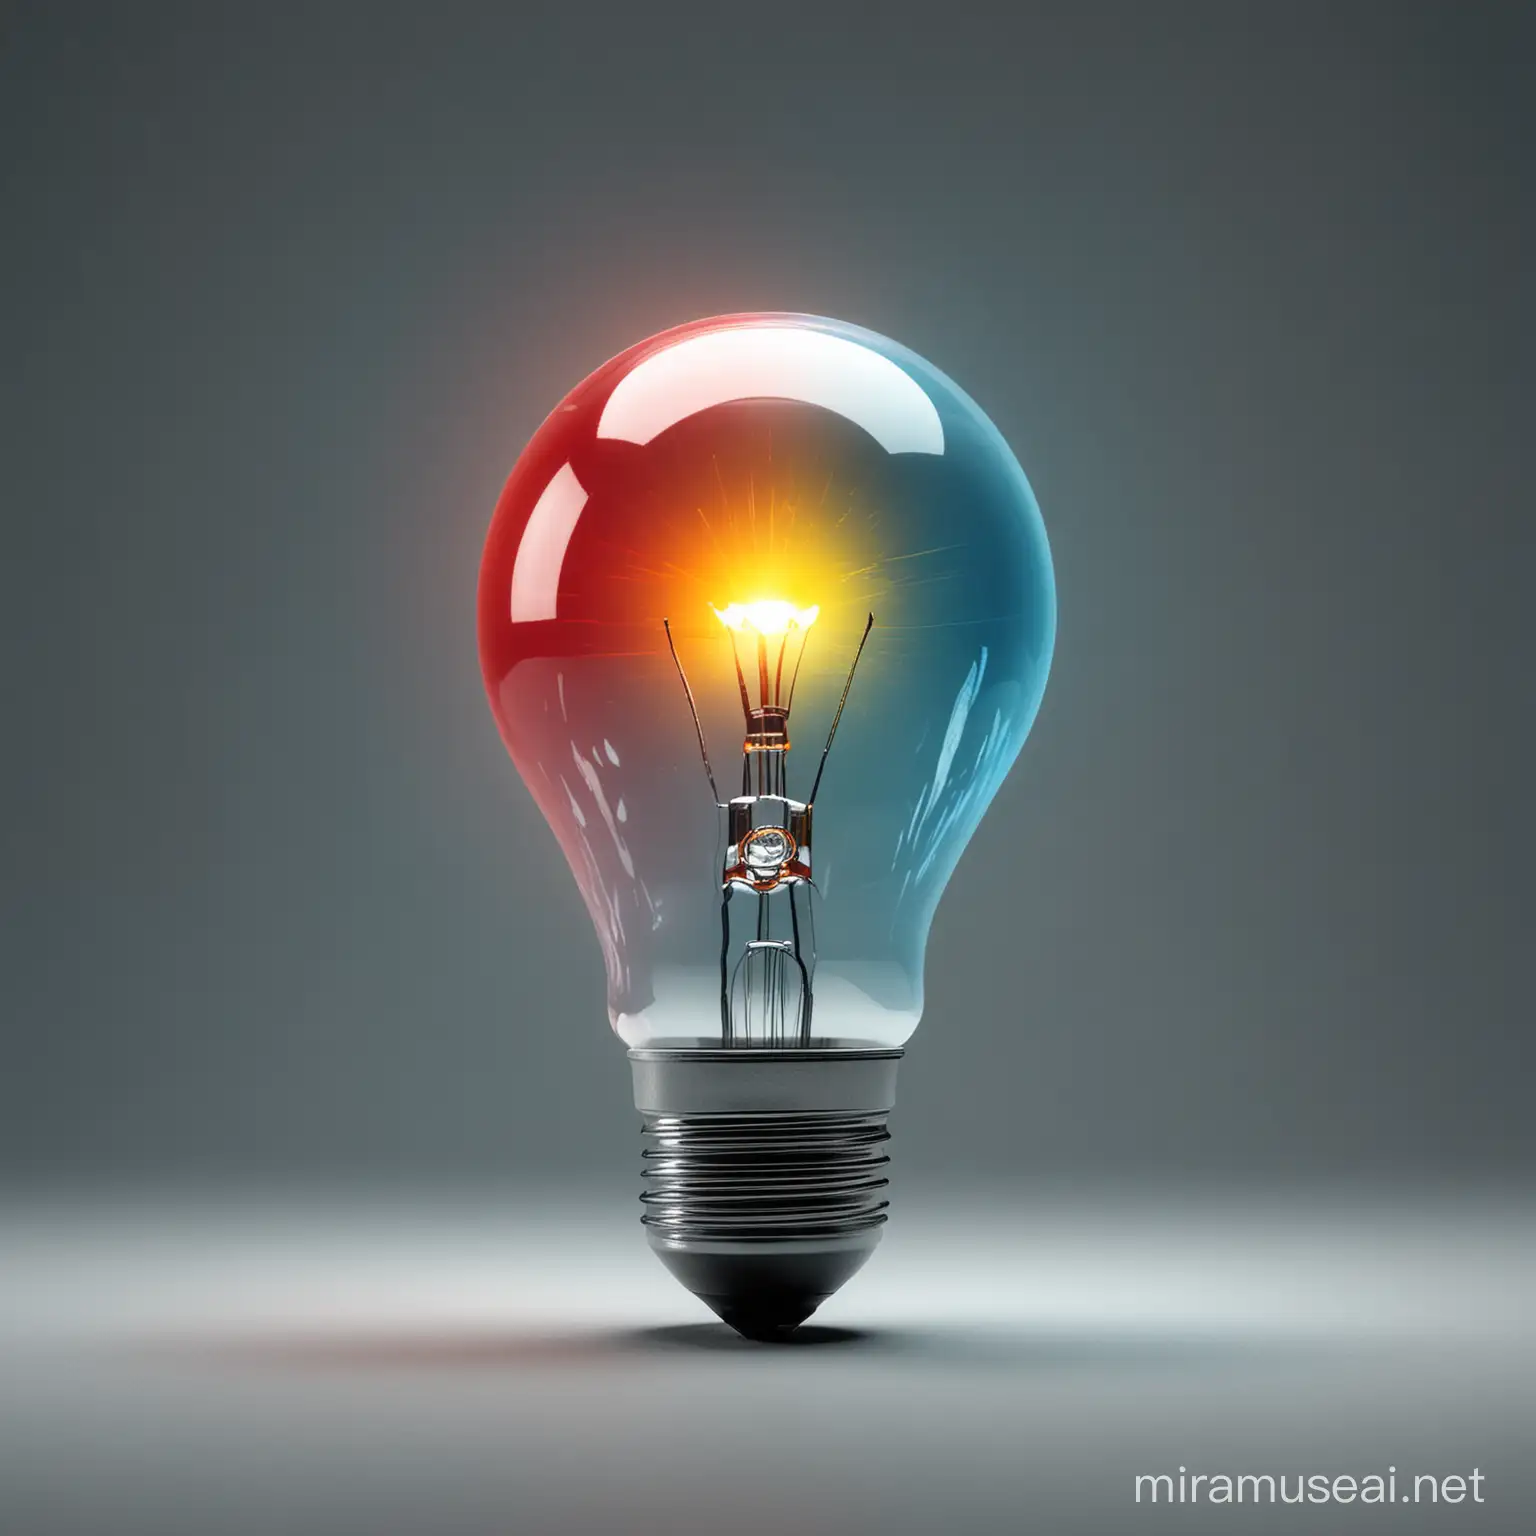 Futuristic Blinking Light Bulb with Red Yellow and Blue Illumination on Gray Background